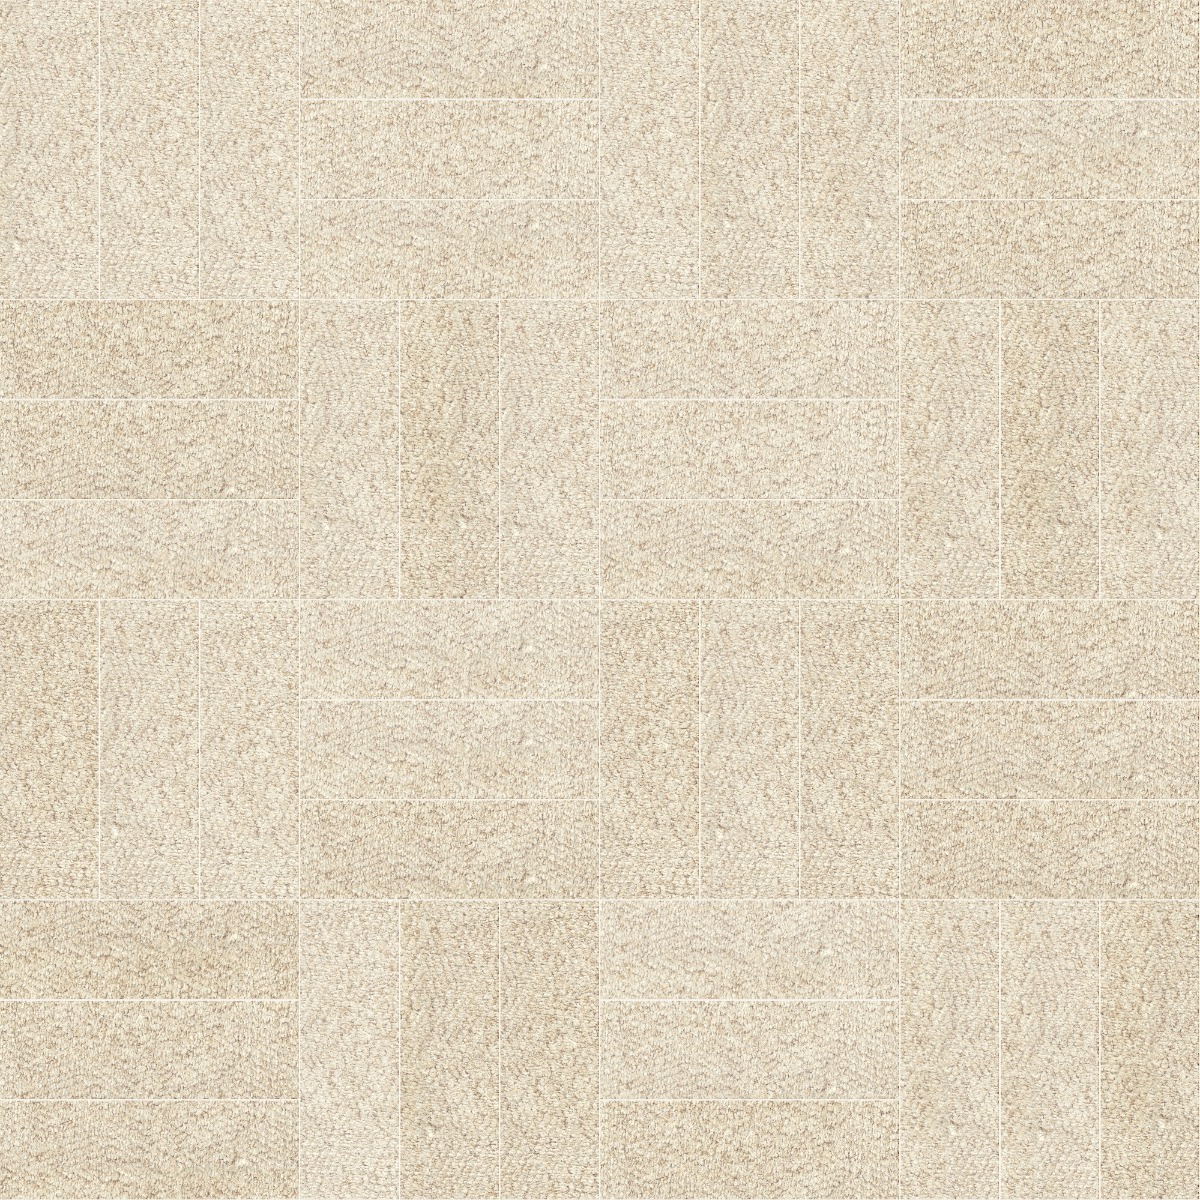 A seamless carpet texture with oatmeal loop pile carpet units arranged in a Basketweave pattern